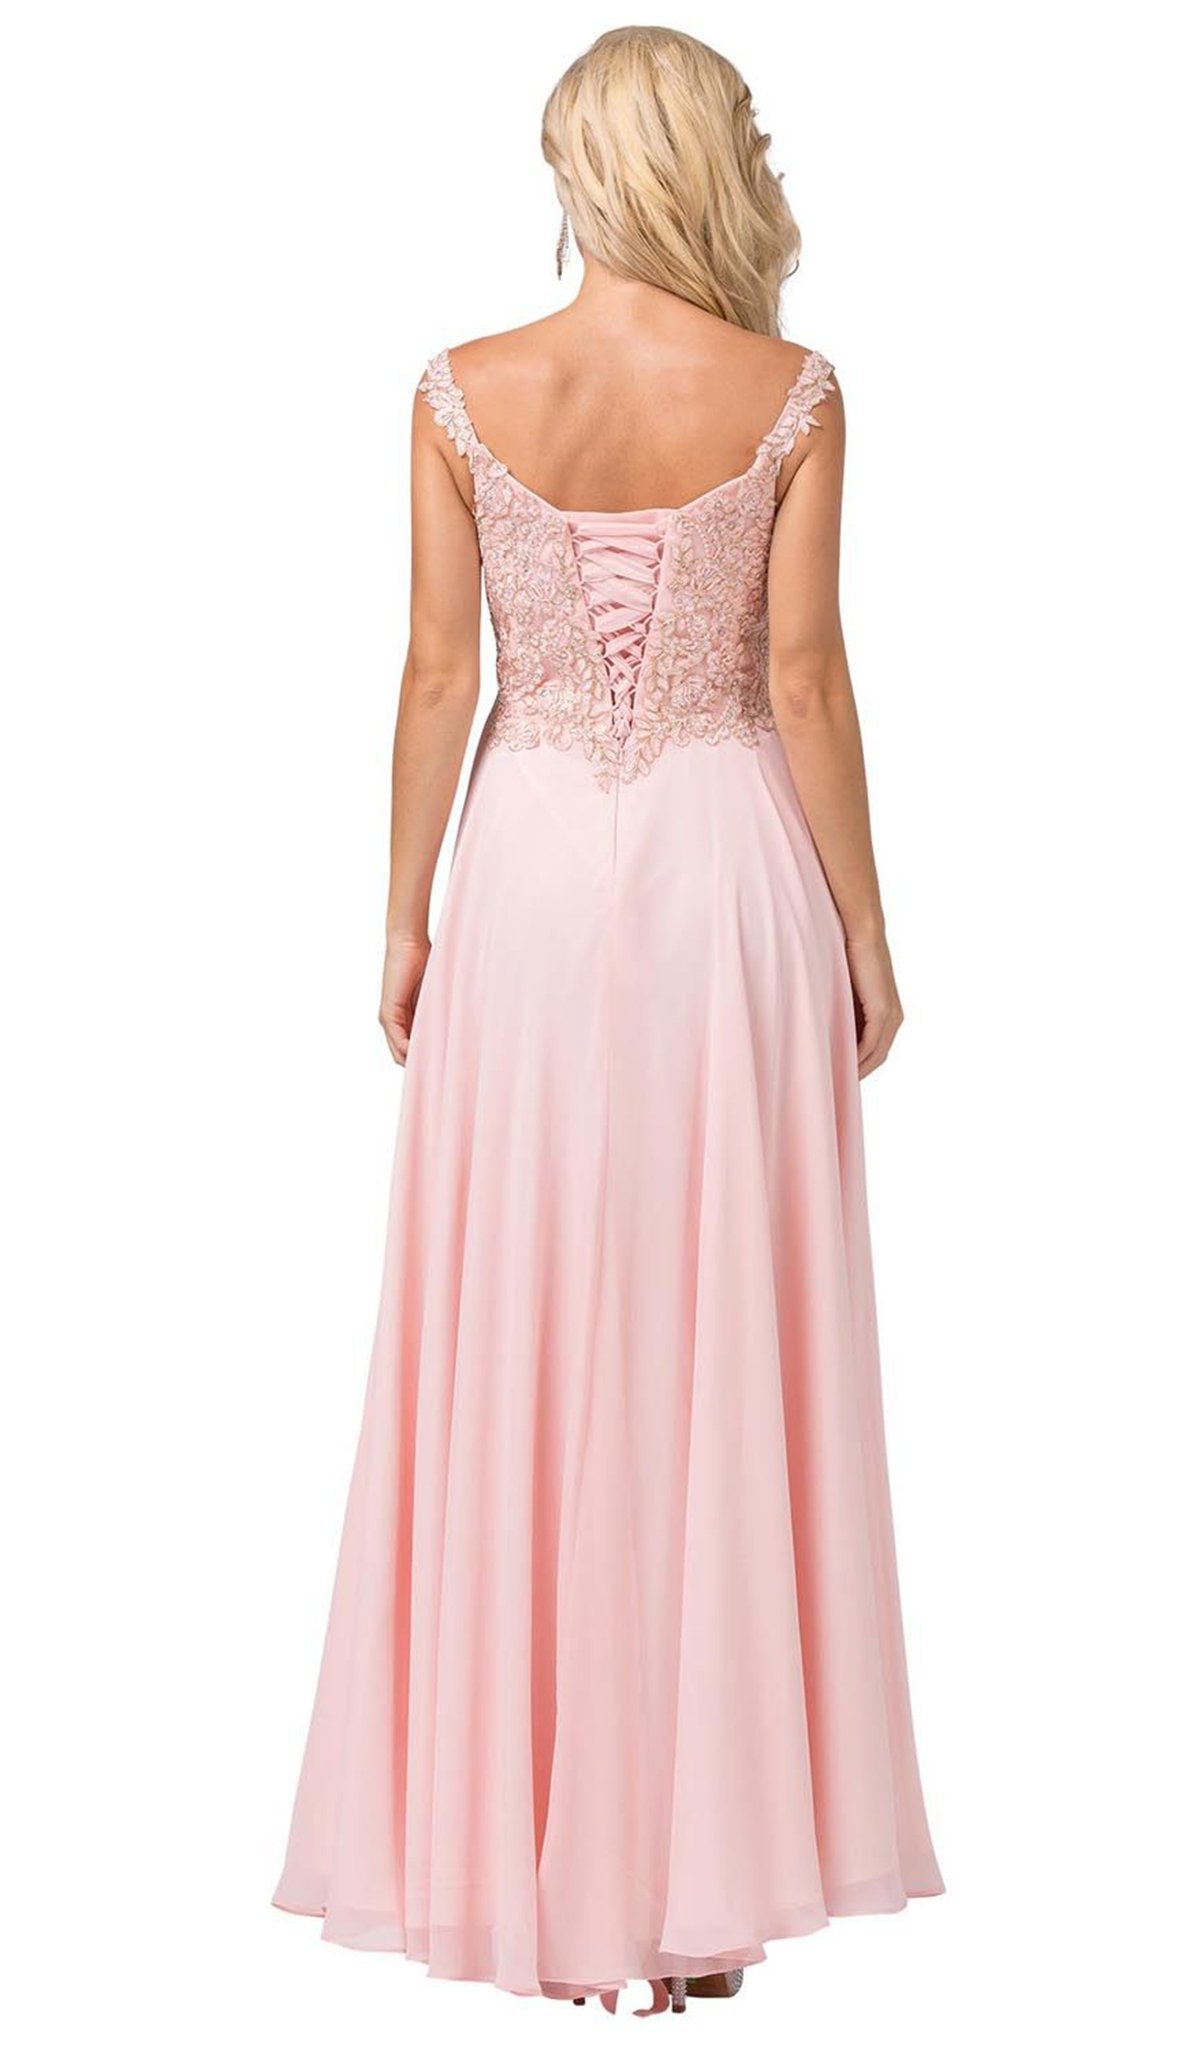 Dancing Queen - 2818 Beaded Lace Bodice Lace-Up Back Chiffon Gown In Pink